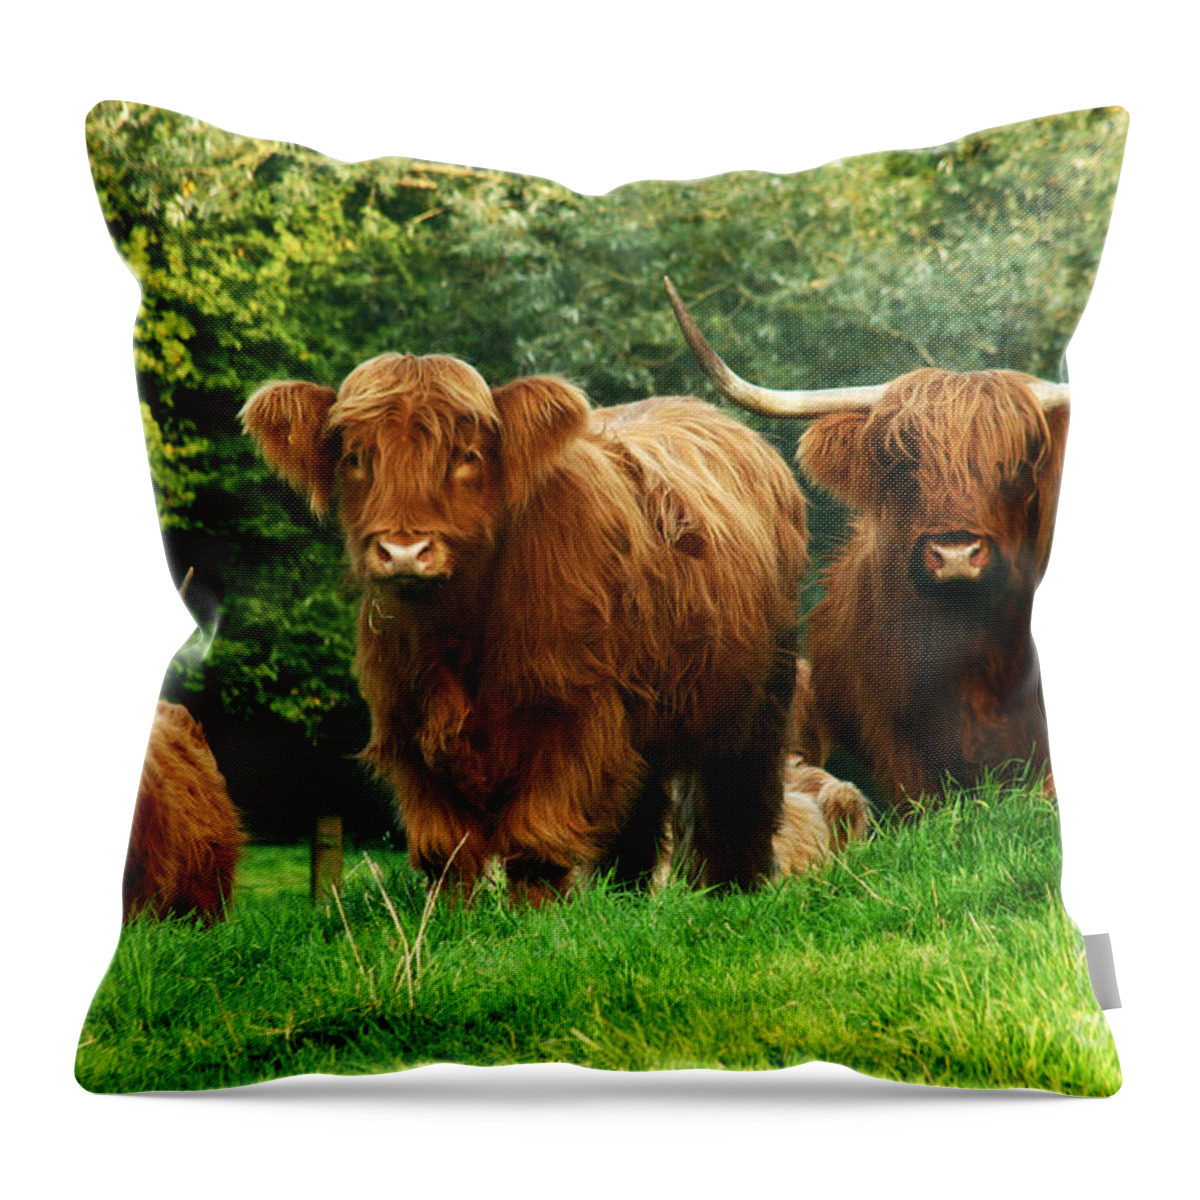 Cow Throw Pillow featuring the photograph Highland Cattle #1 by Ang El